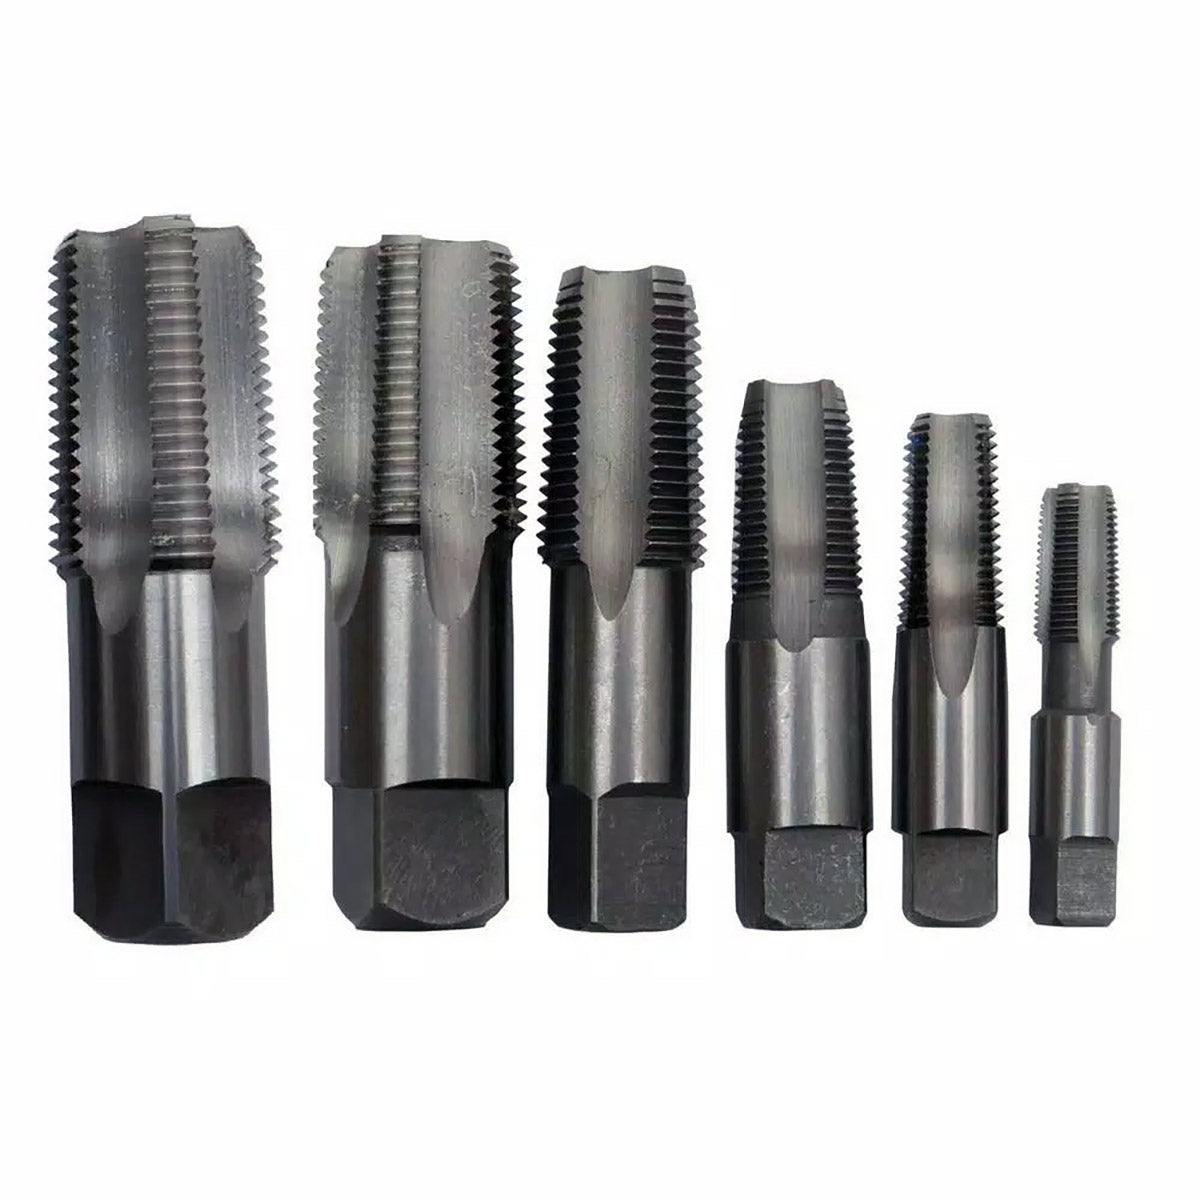 Drill America Carbon Steel Npt Pipe Tap Set In Wood Case 1" - 1-1/2" (6 Piece Set)